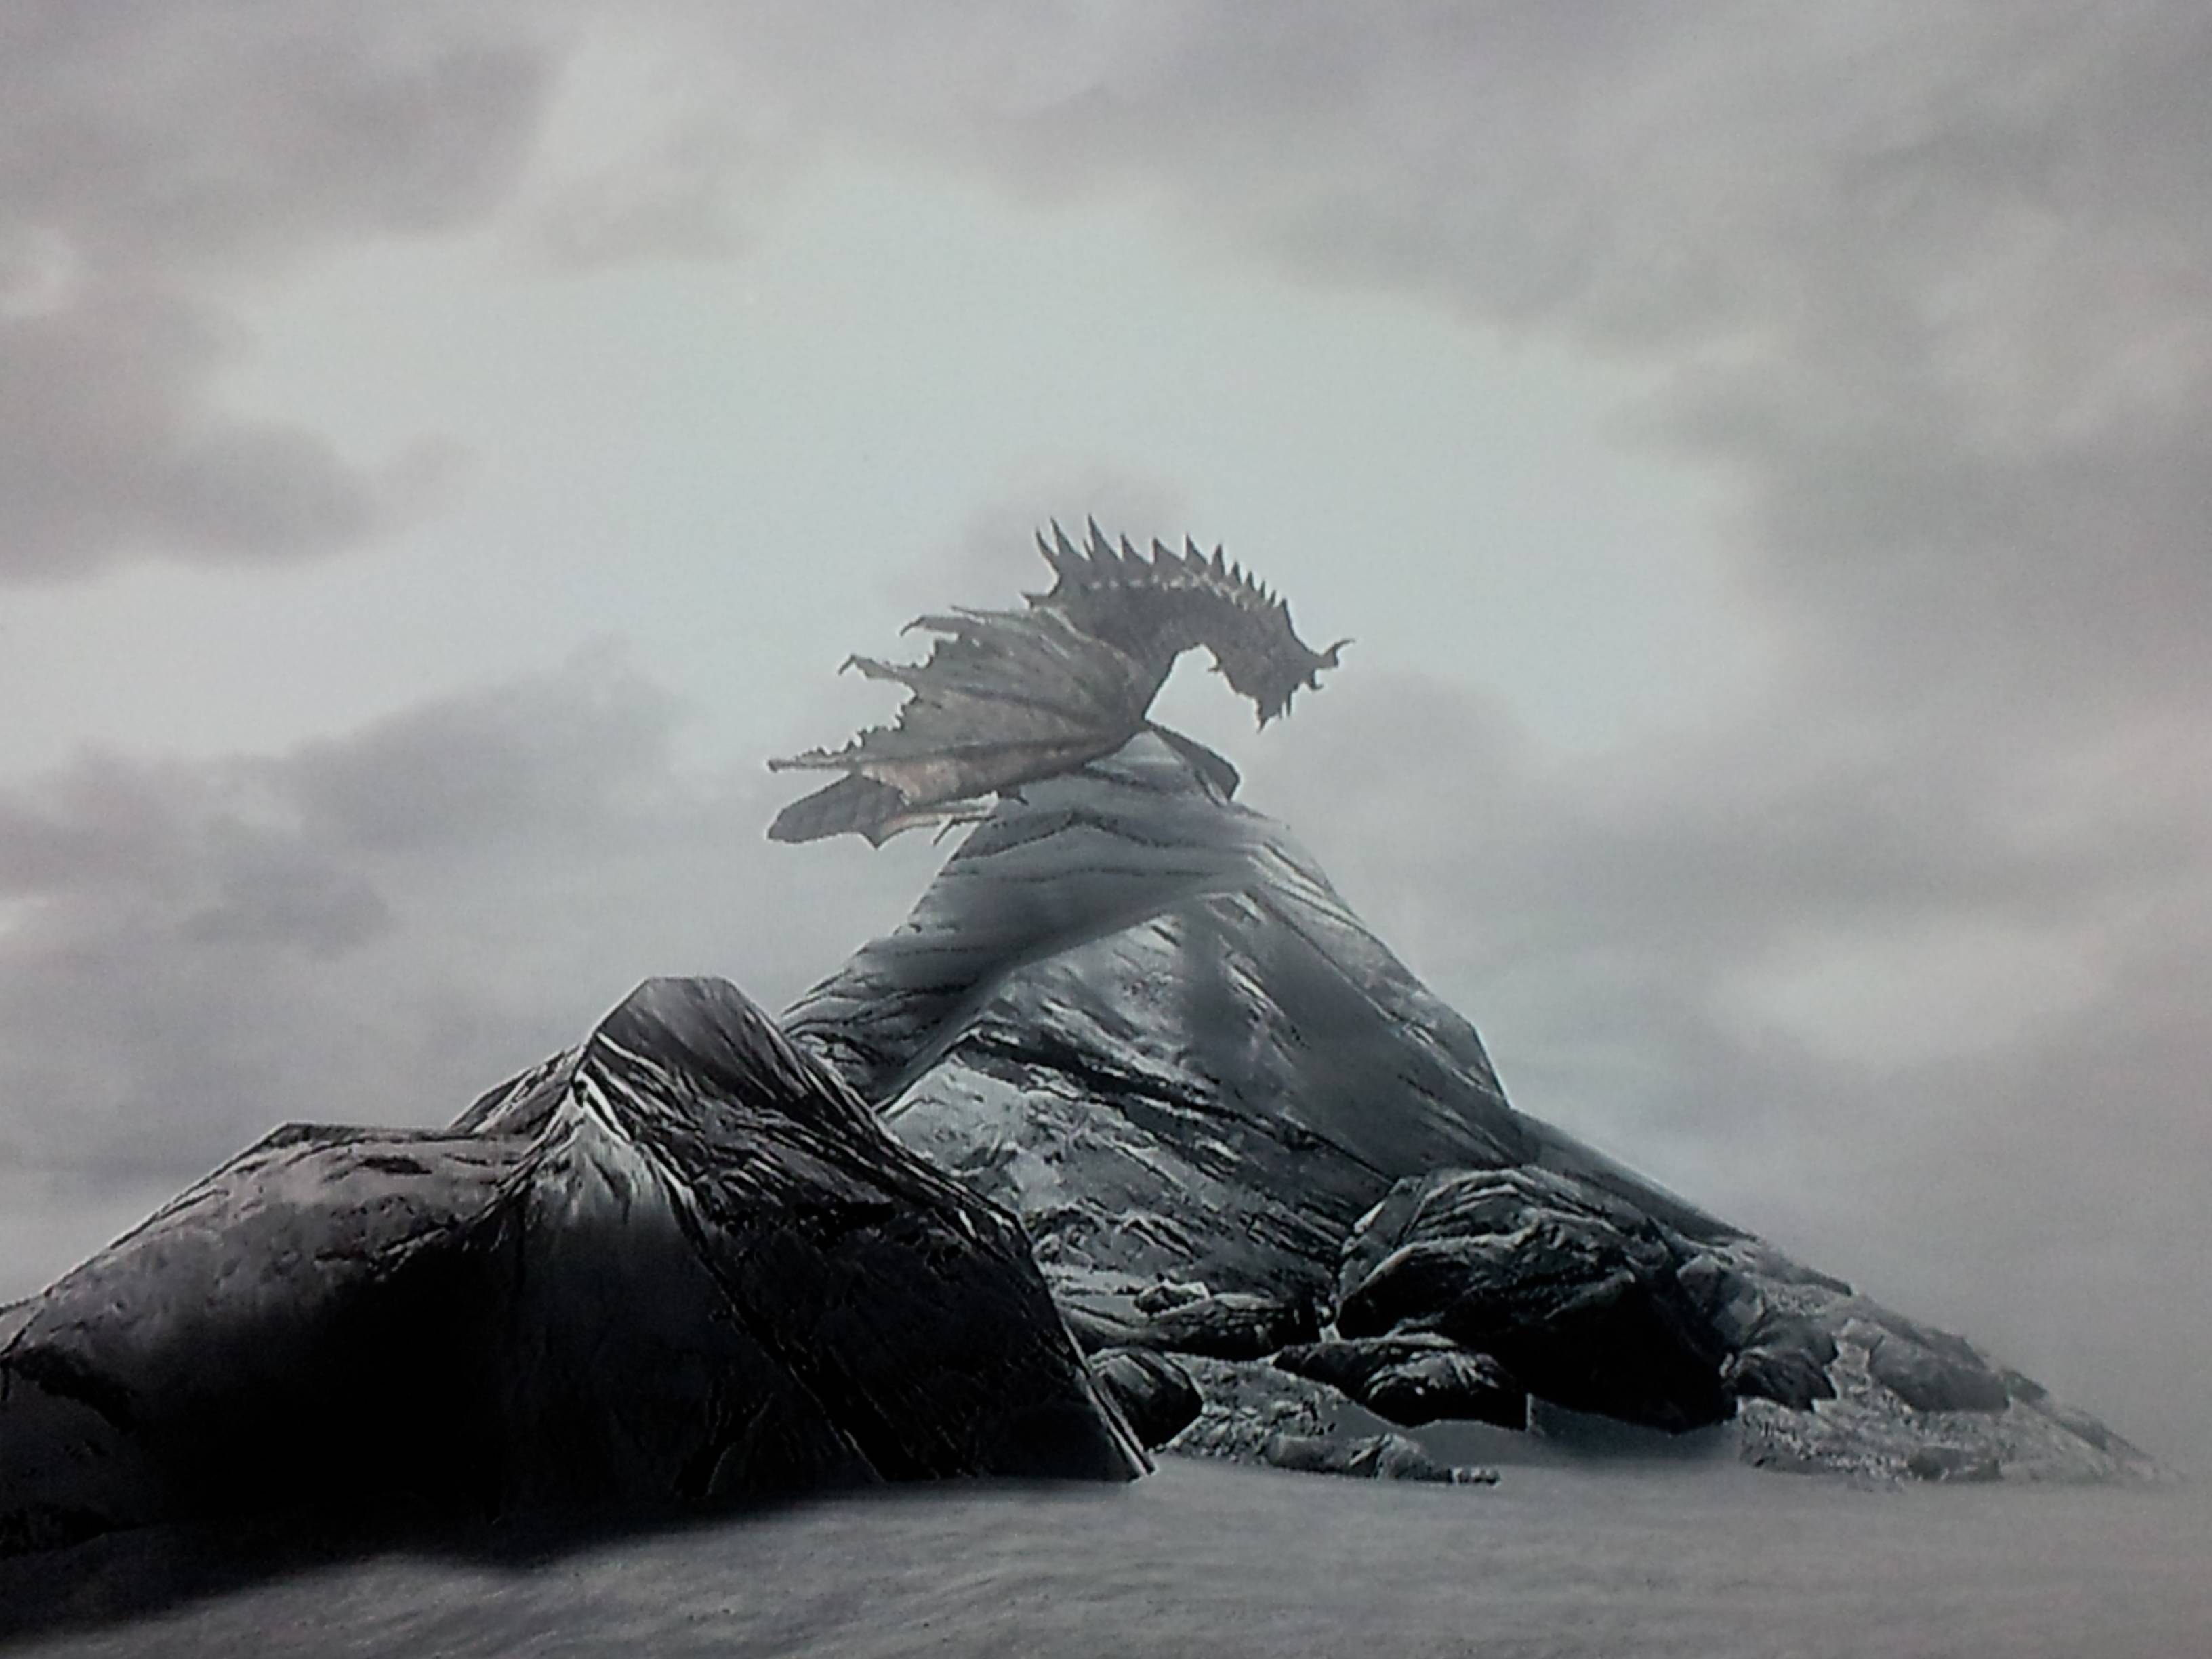 I noticed Paarthurnax sitting on that rock and thought